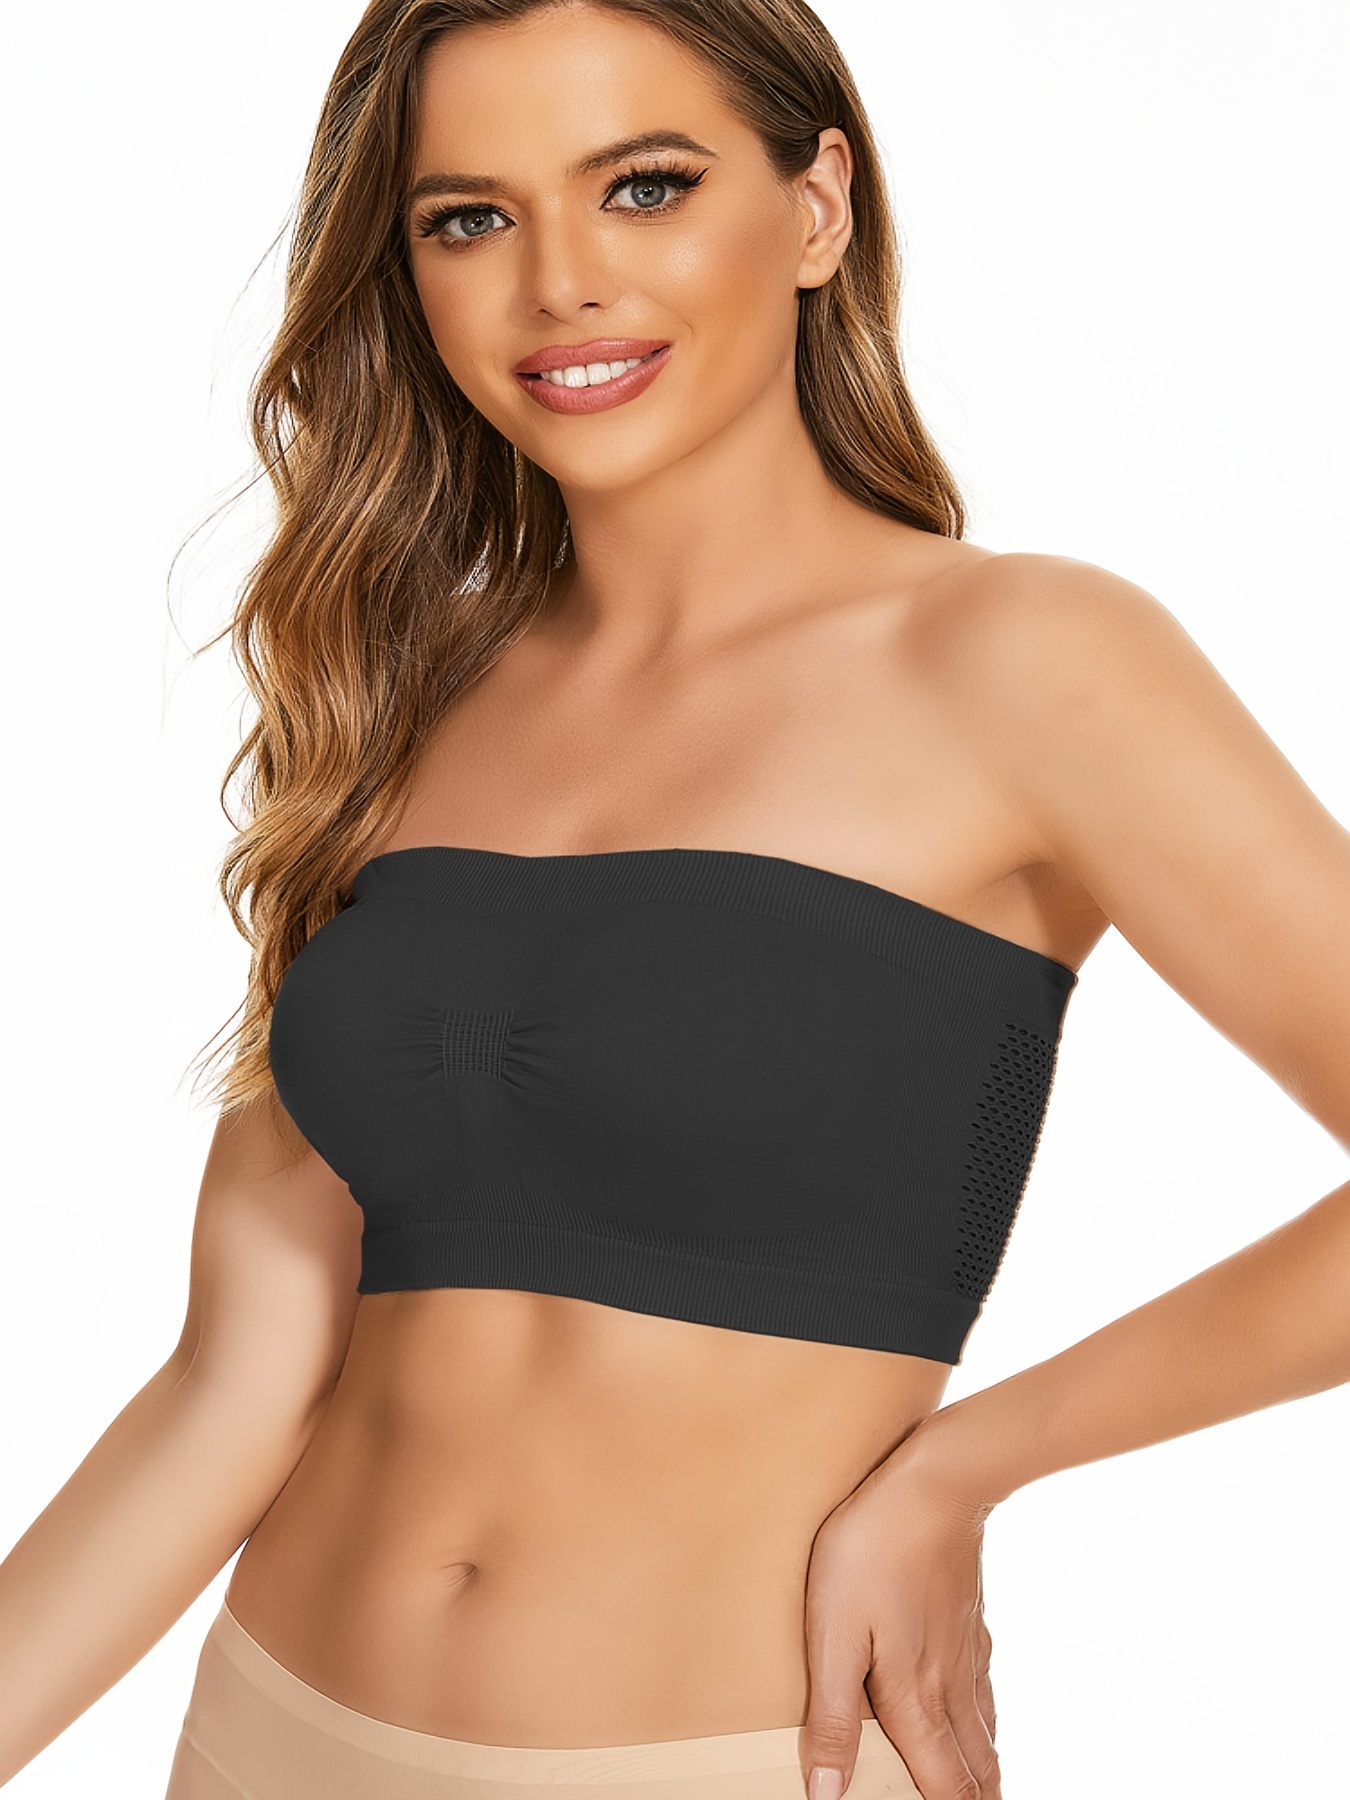 Women's Padded Bandeau Sports Tube Top Bra Strapless Wireless Solid  Seamless Yoga Workout Bralette